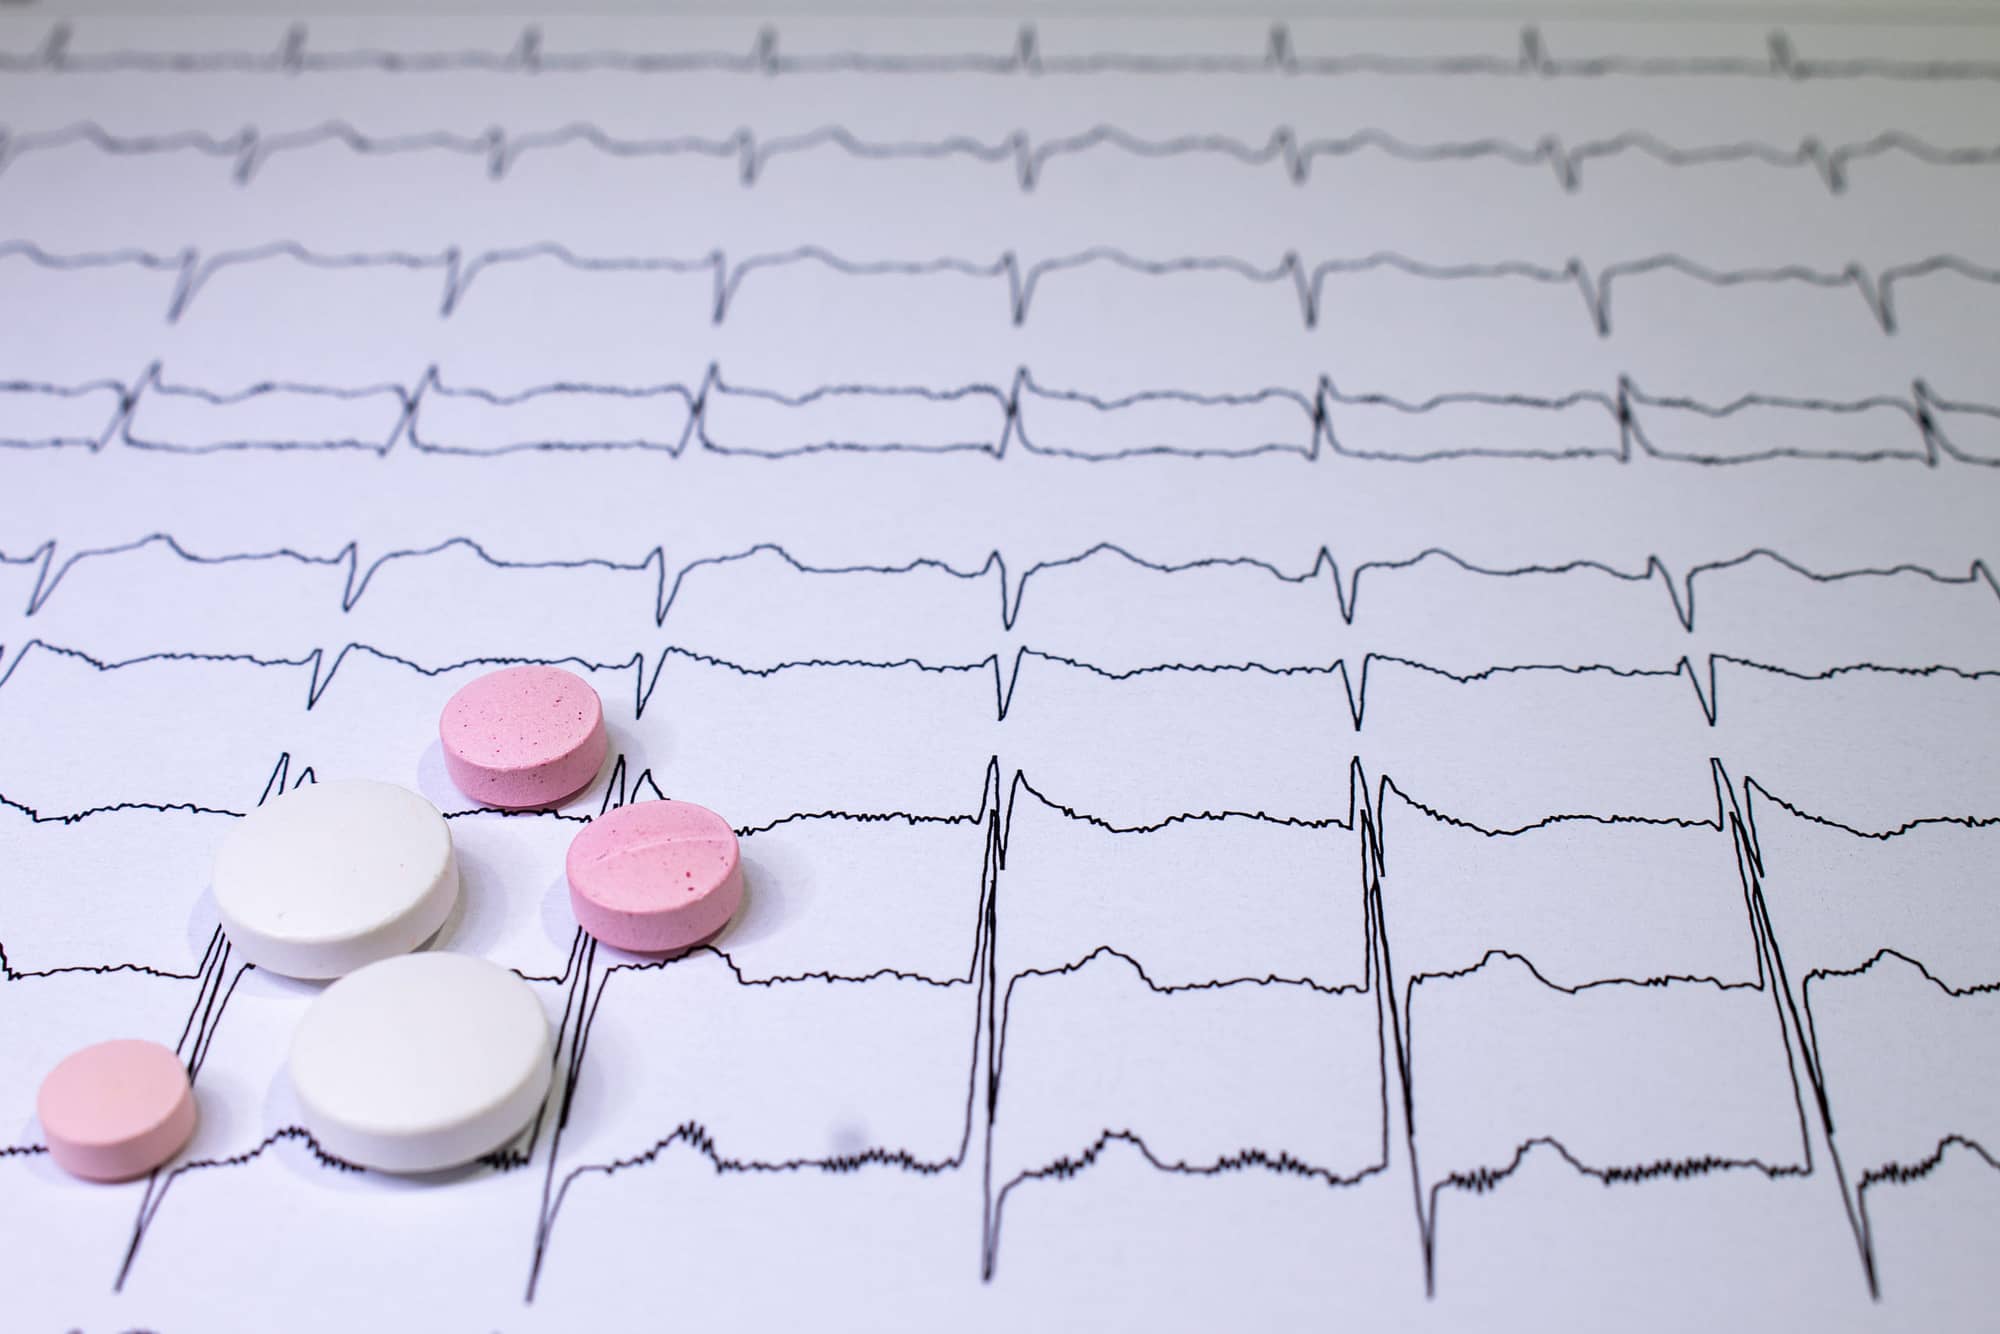 Electrocardiogram with Brugada syndrome. Colored pills on an EKG